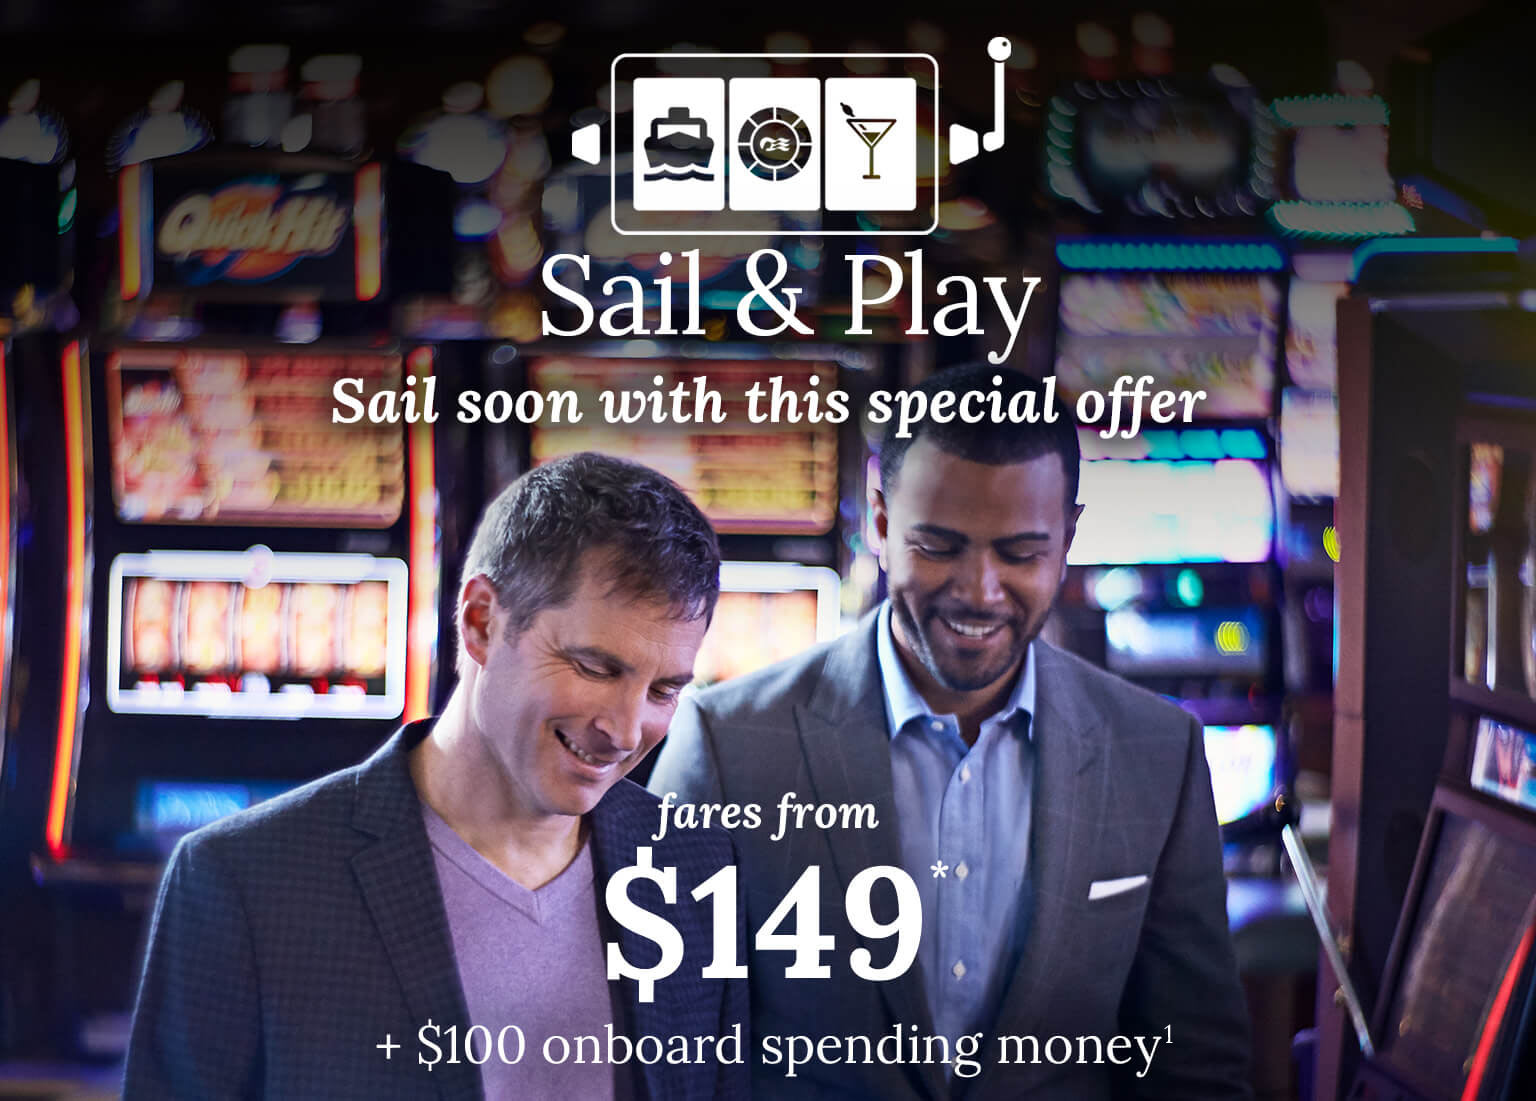 Fares from $149 + $100 onboard spending money. Click here to book.